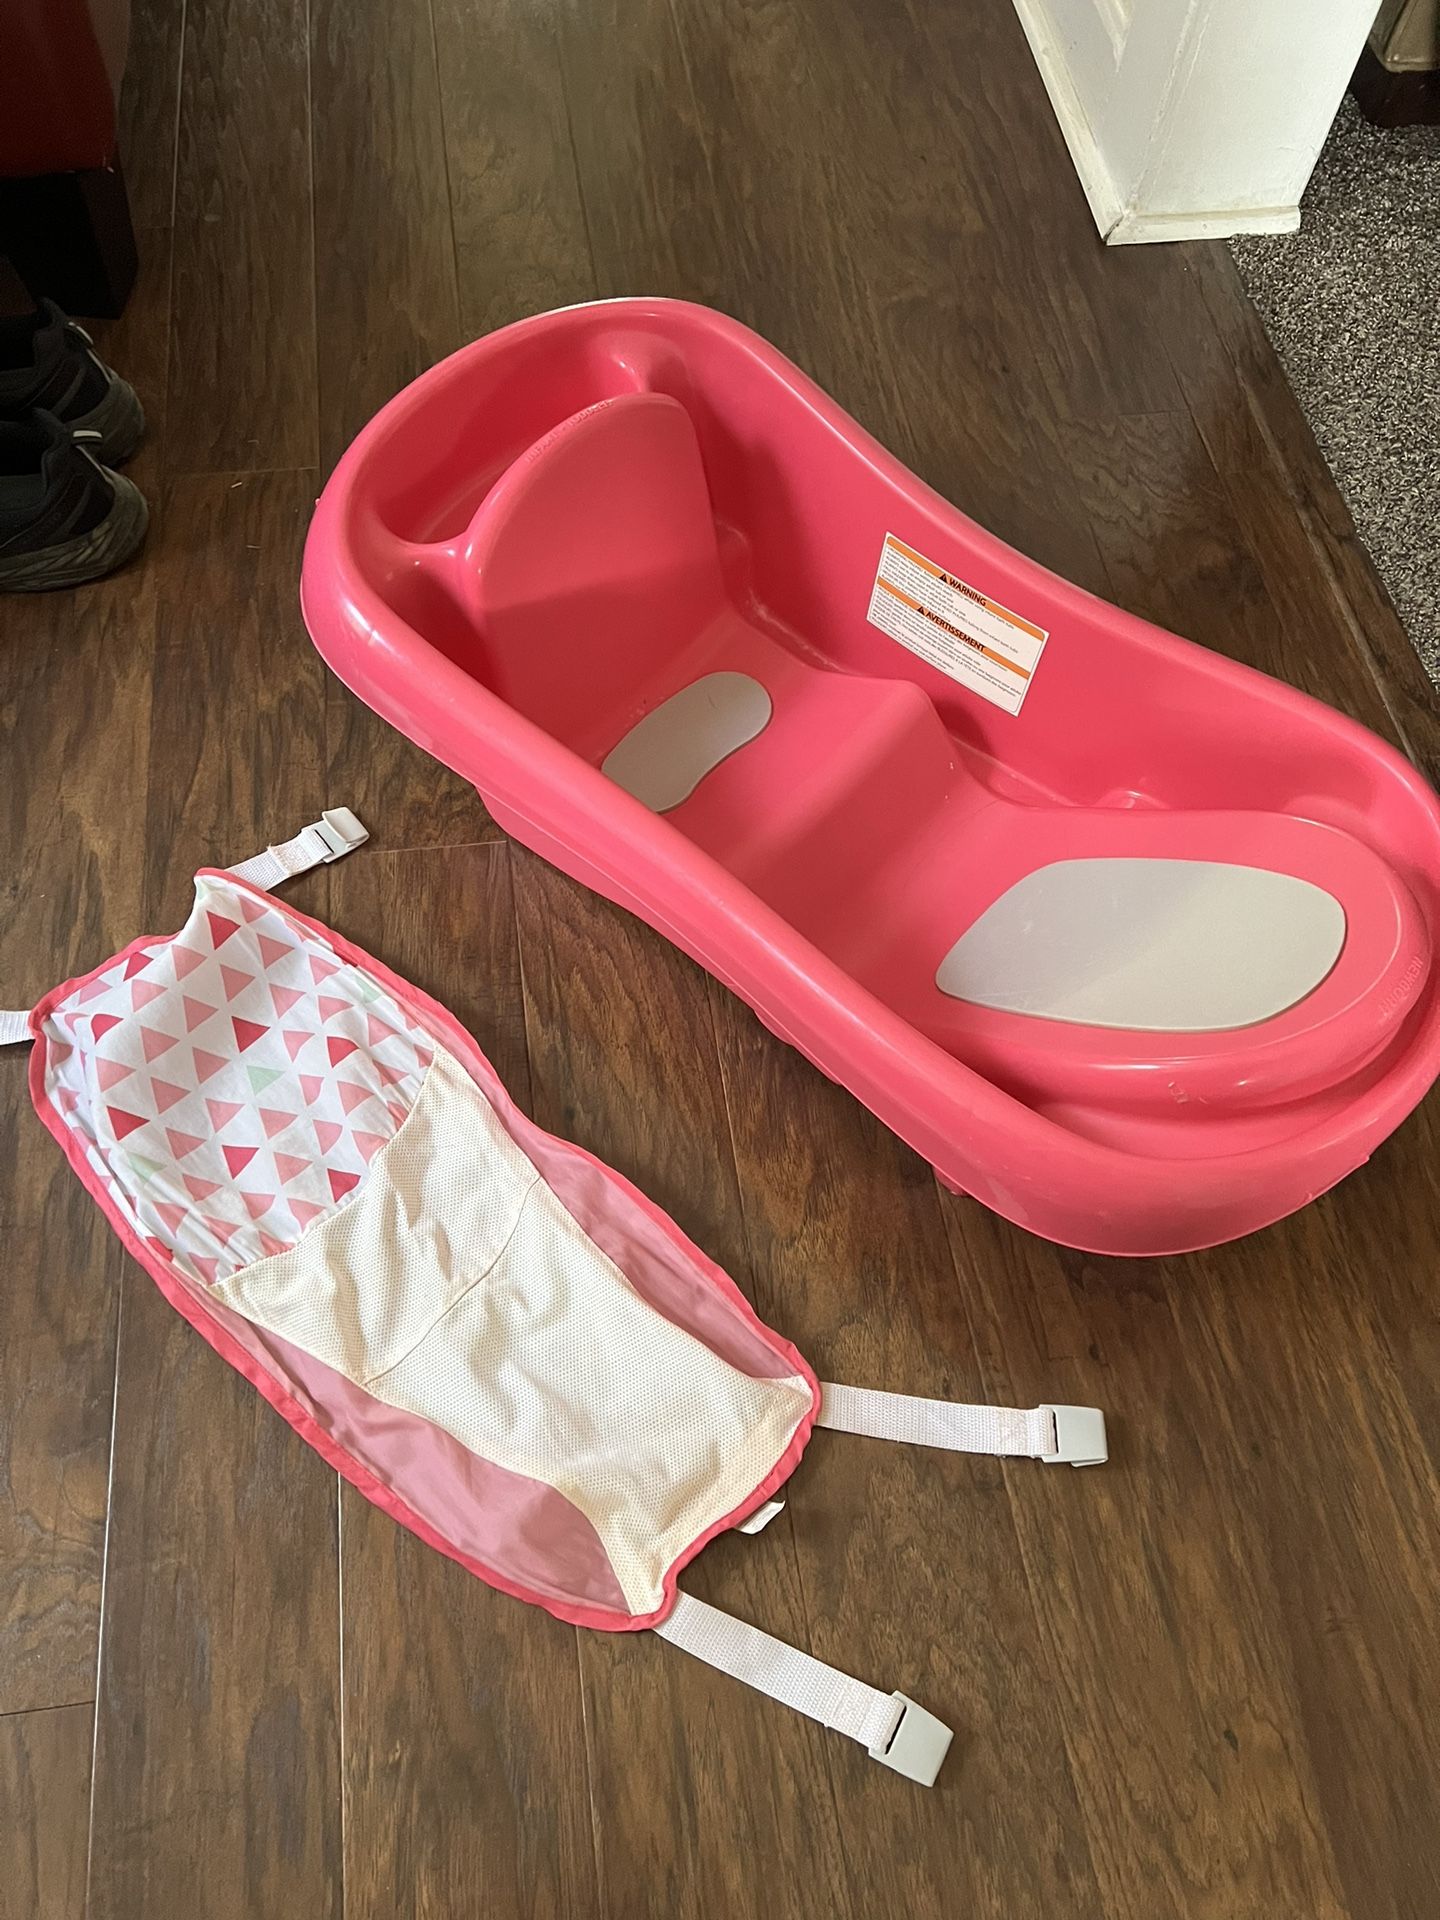 $7 Infant / Baby Bath and Sling 